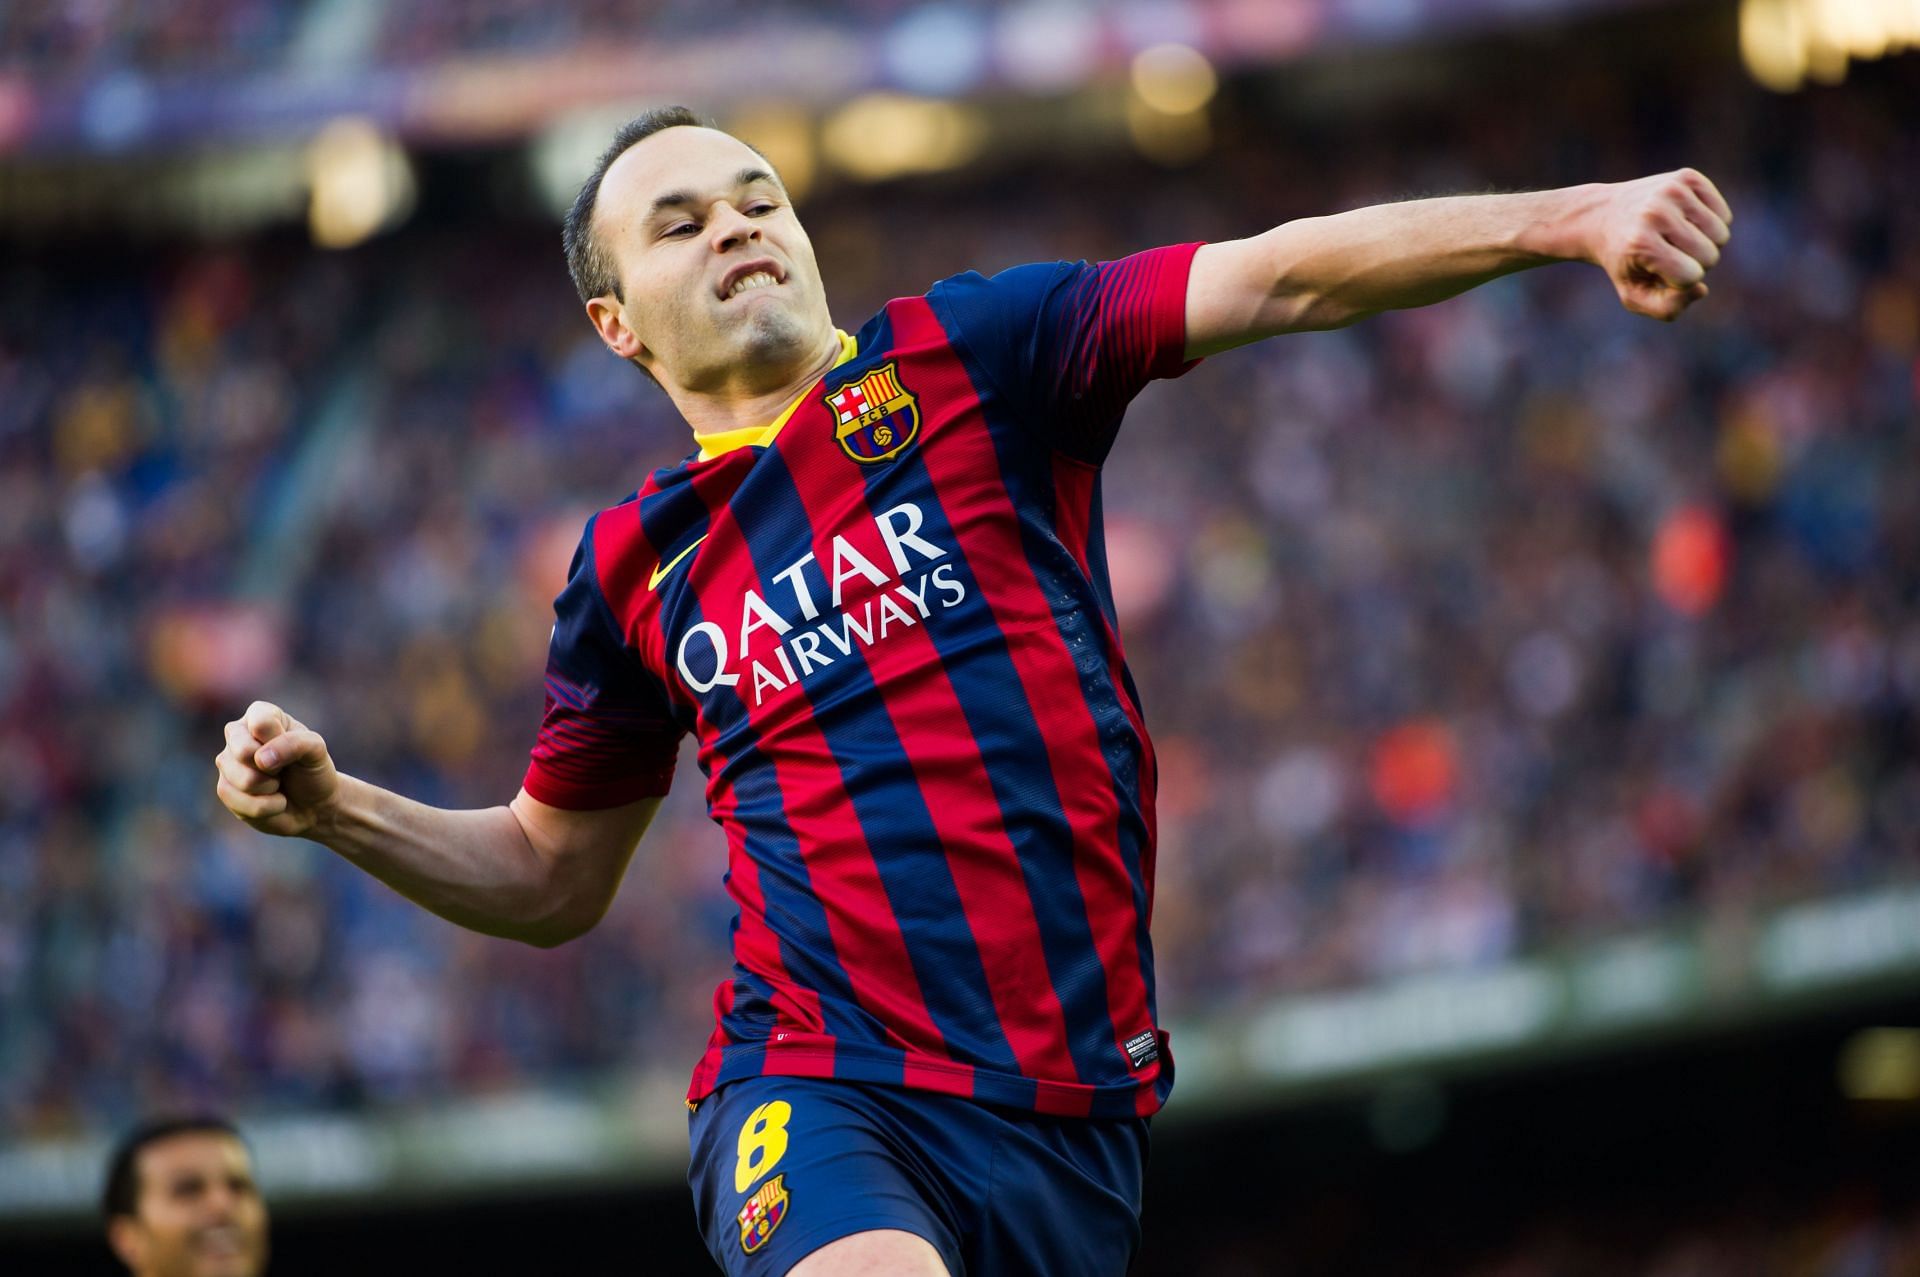 Former Barcelona captain Andres Iniesta has commented on the upcoming El Clasico